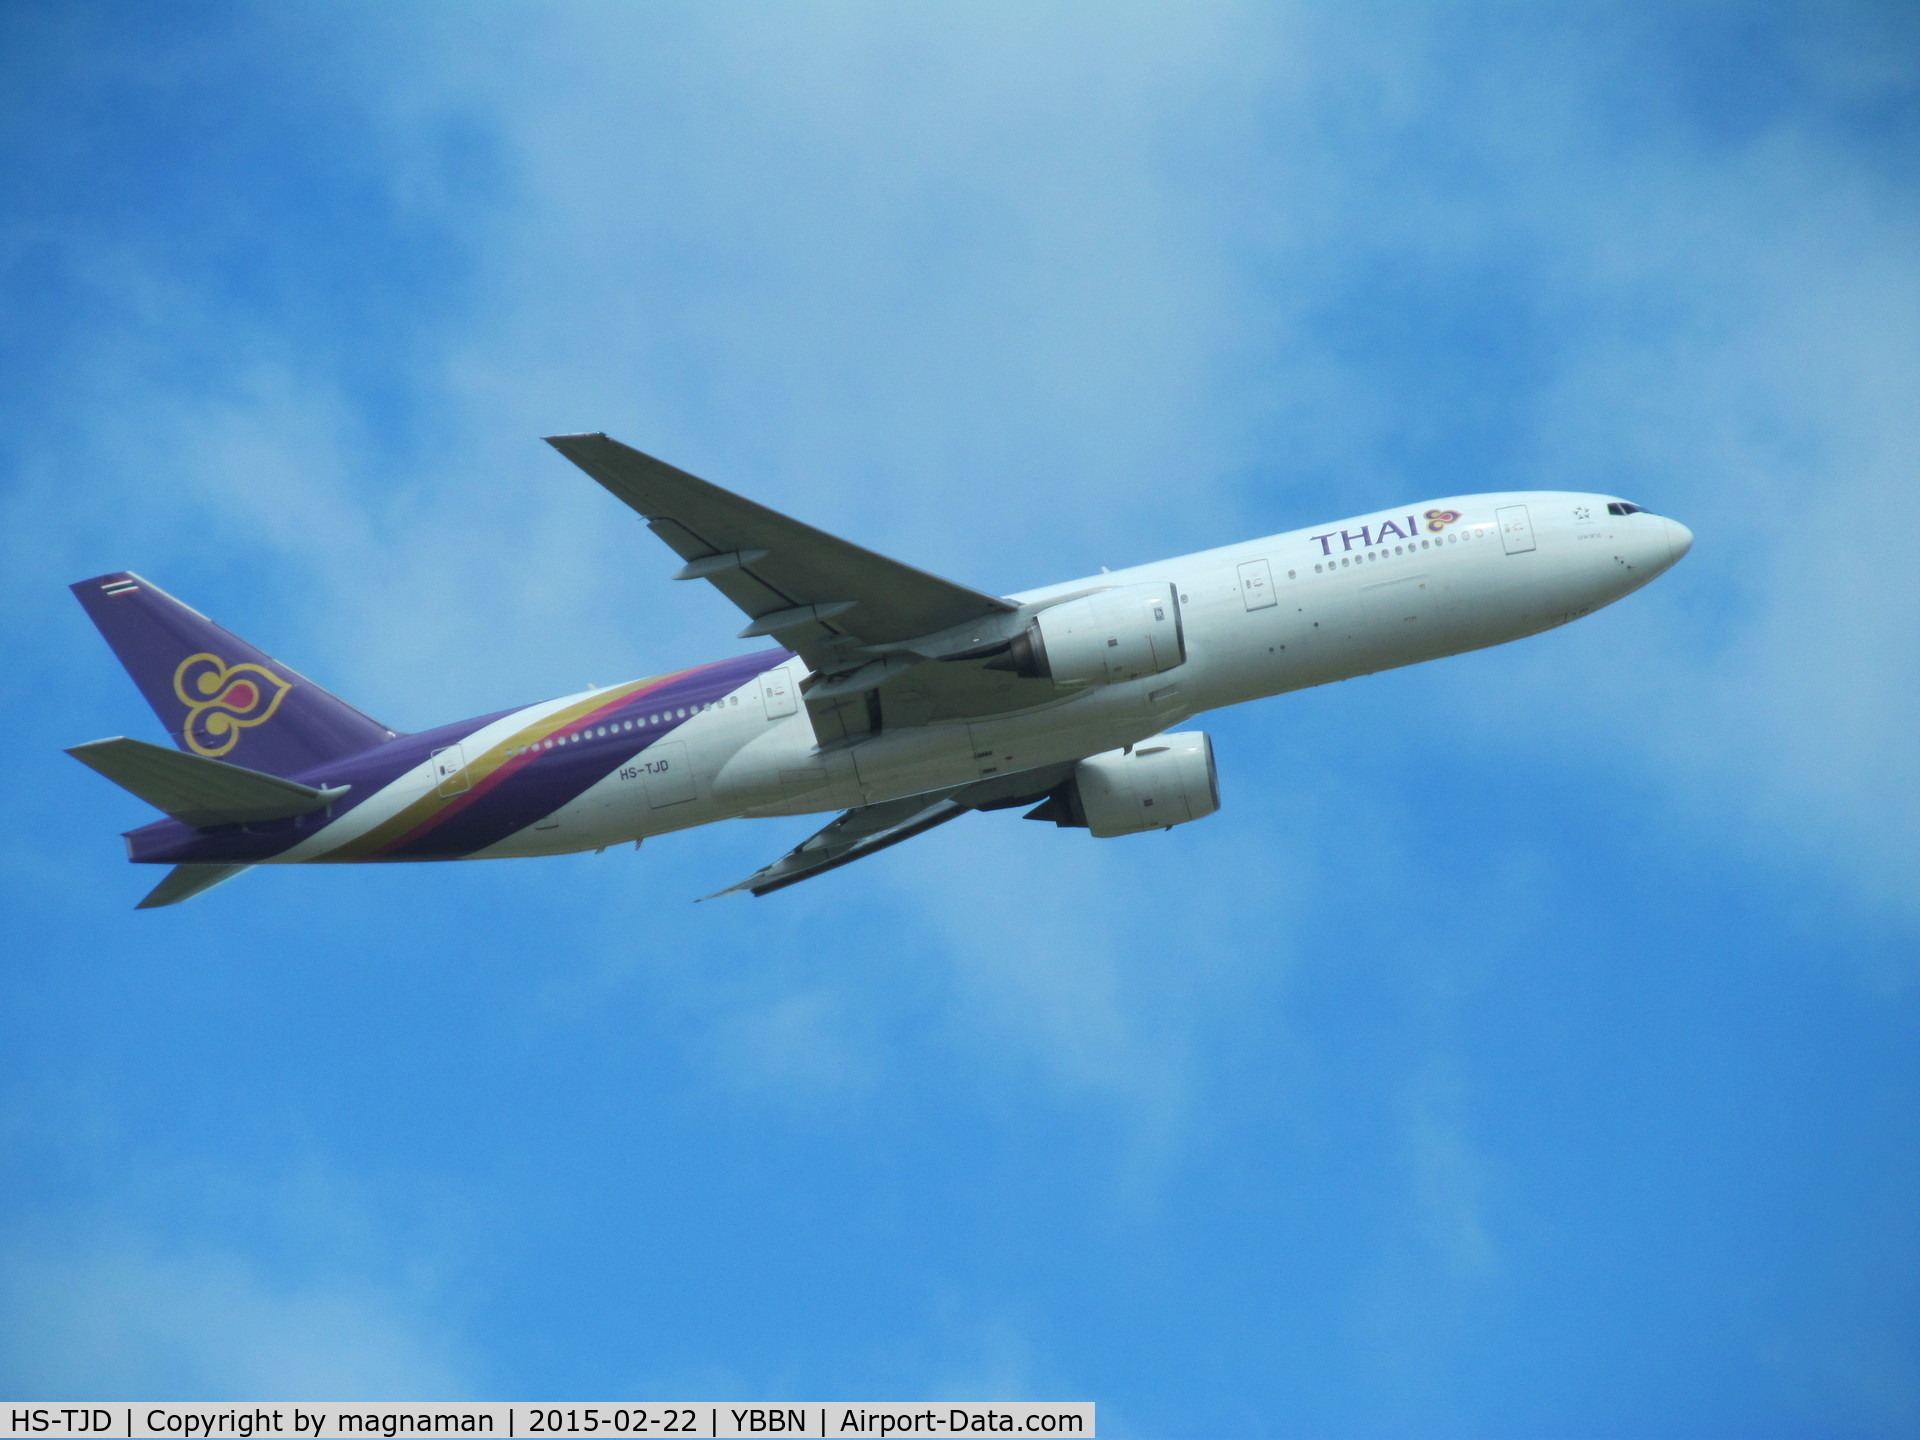 HS-TJD, 1996 Boeing 777-2D7 C/N 27729, on departure from BNE